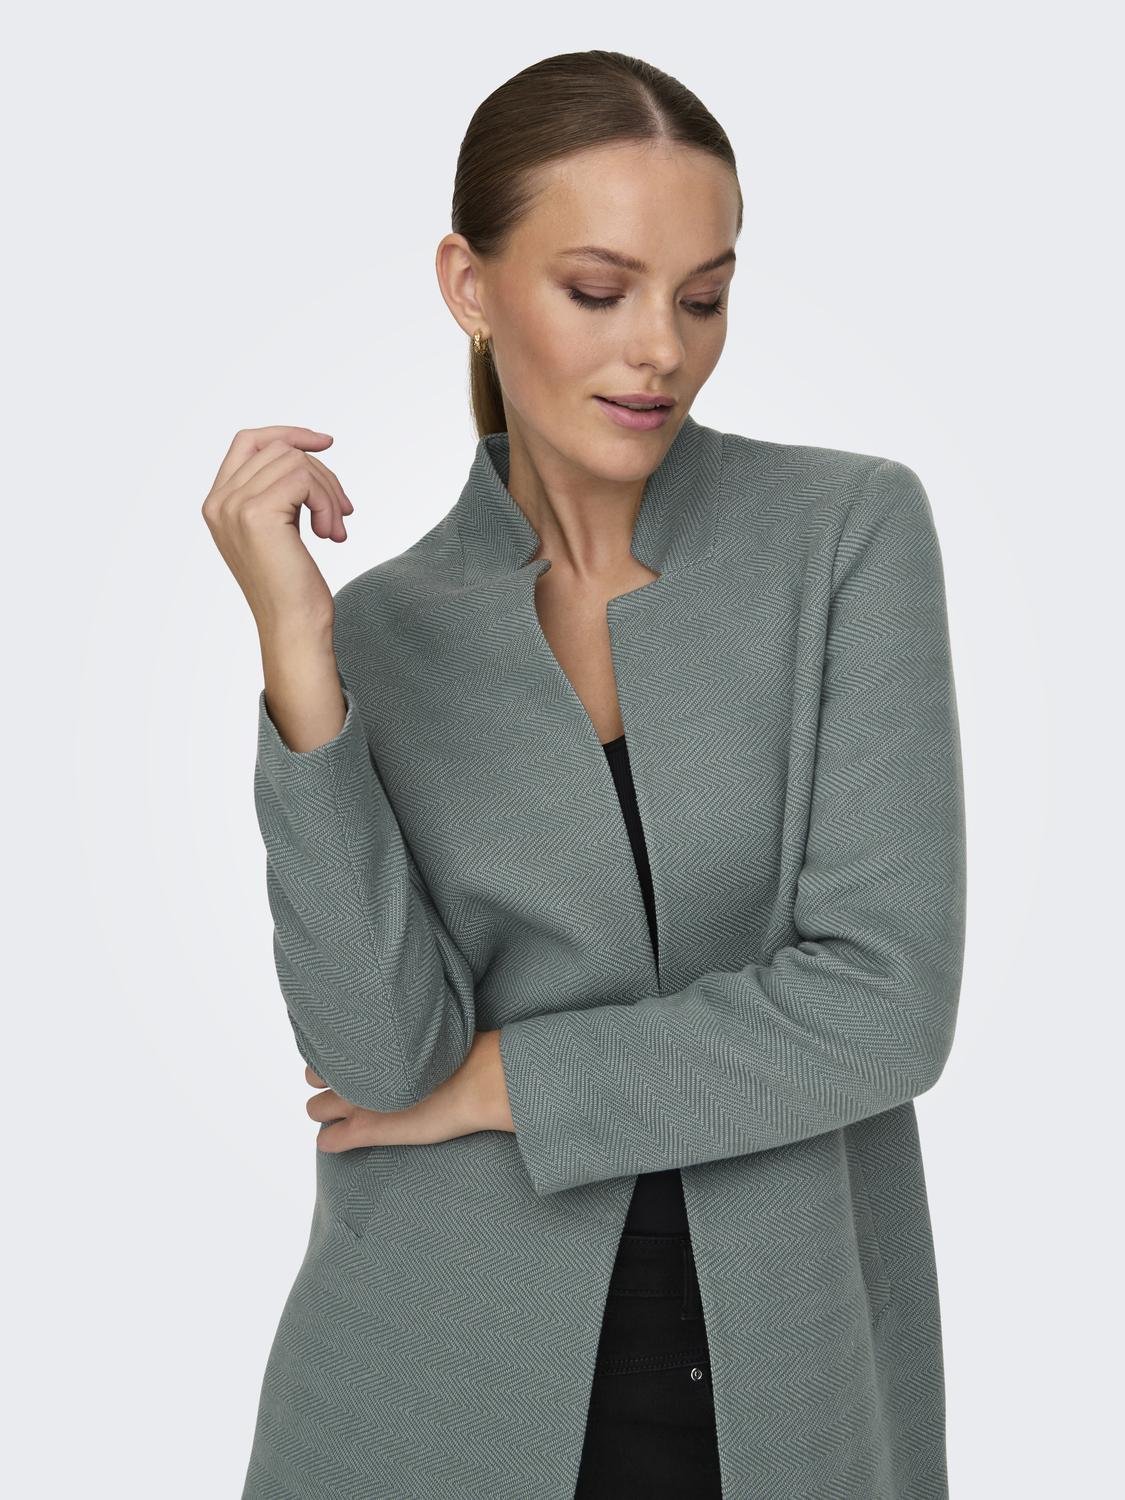 ONLY Coat with high collar -Balsam Green - 15304271